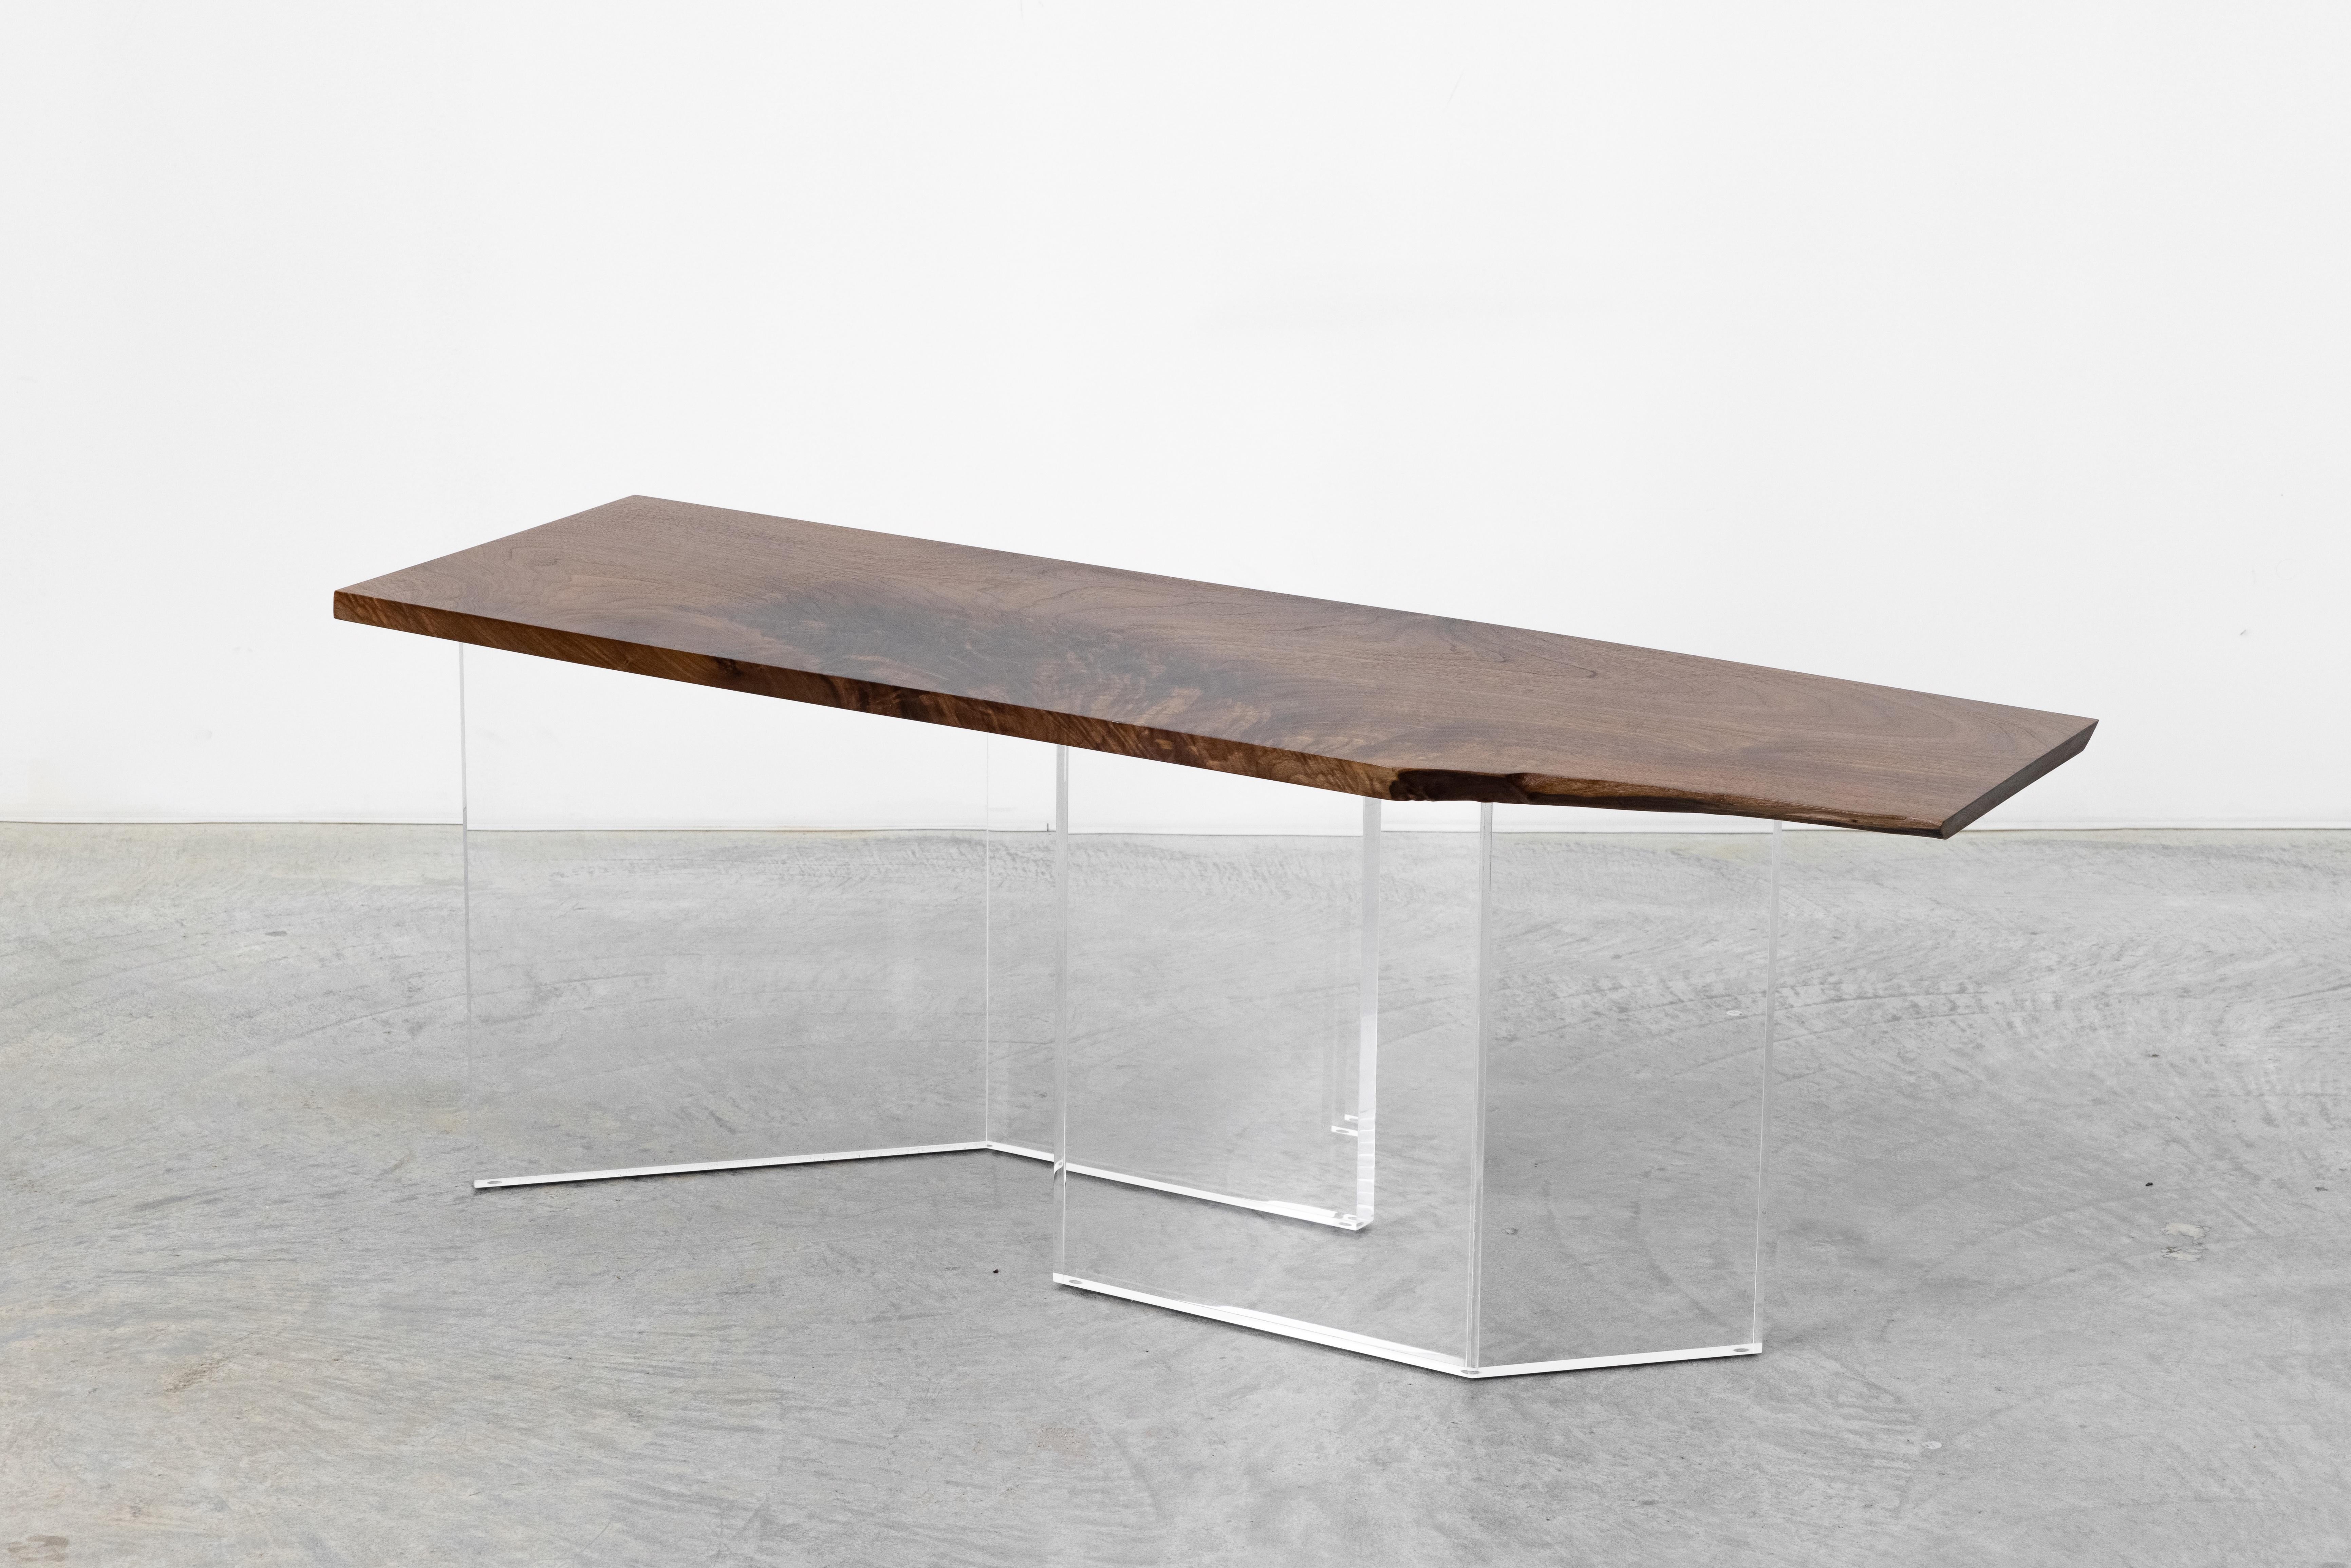 A one-of-a-kind black walnut tabletop with the most stunning natural grain set atop clear acrylic legs offset to allow light to reflect and continue the flow of energy in its space. This is a rare black walnut tabletop, with a natural edge - a